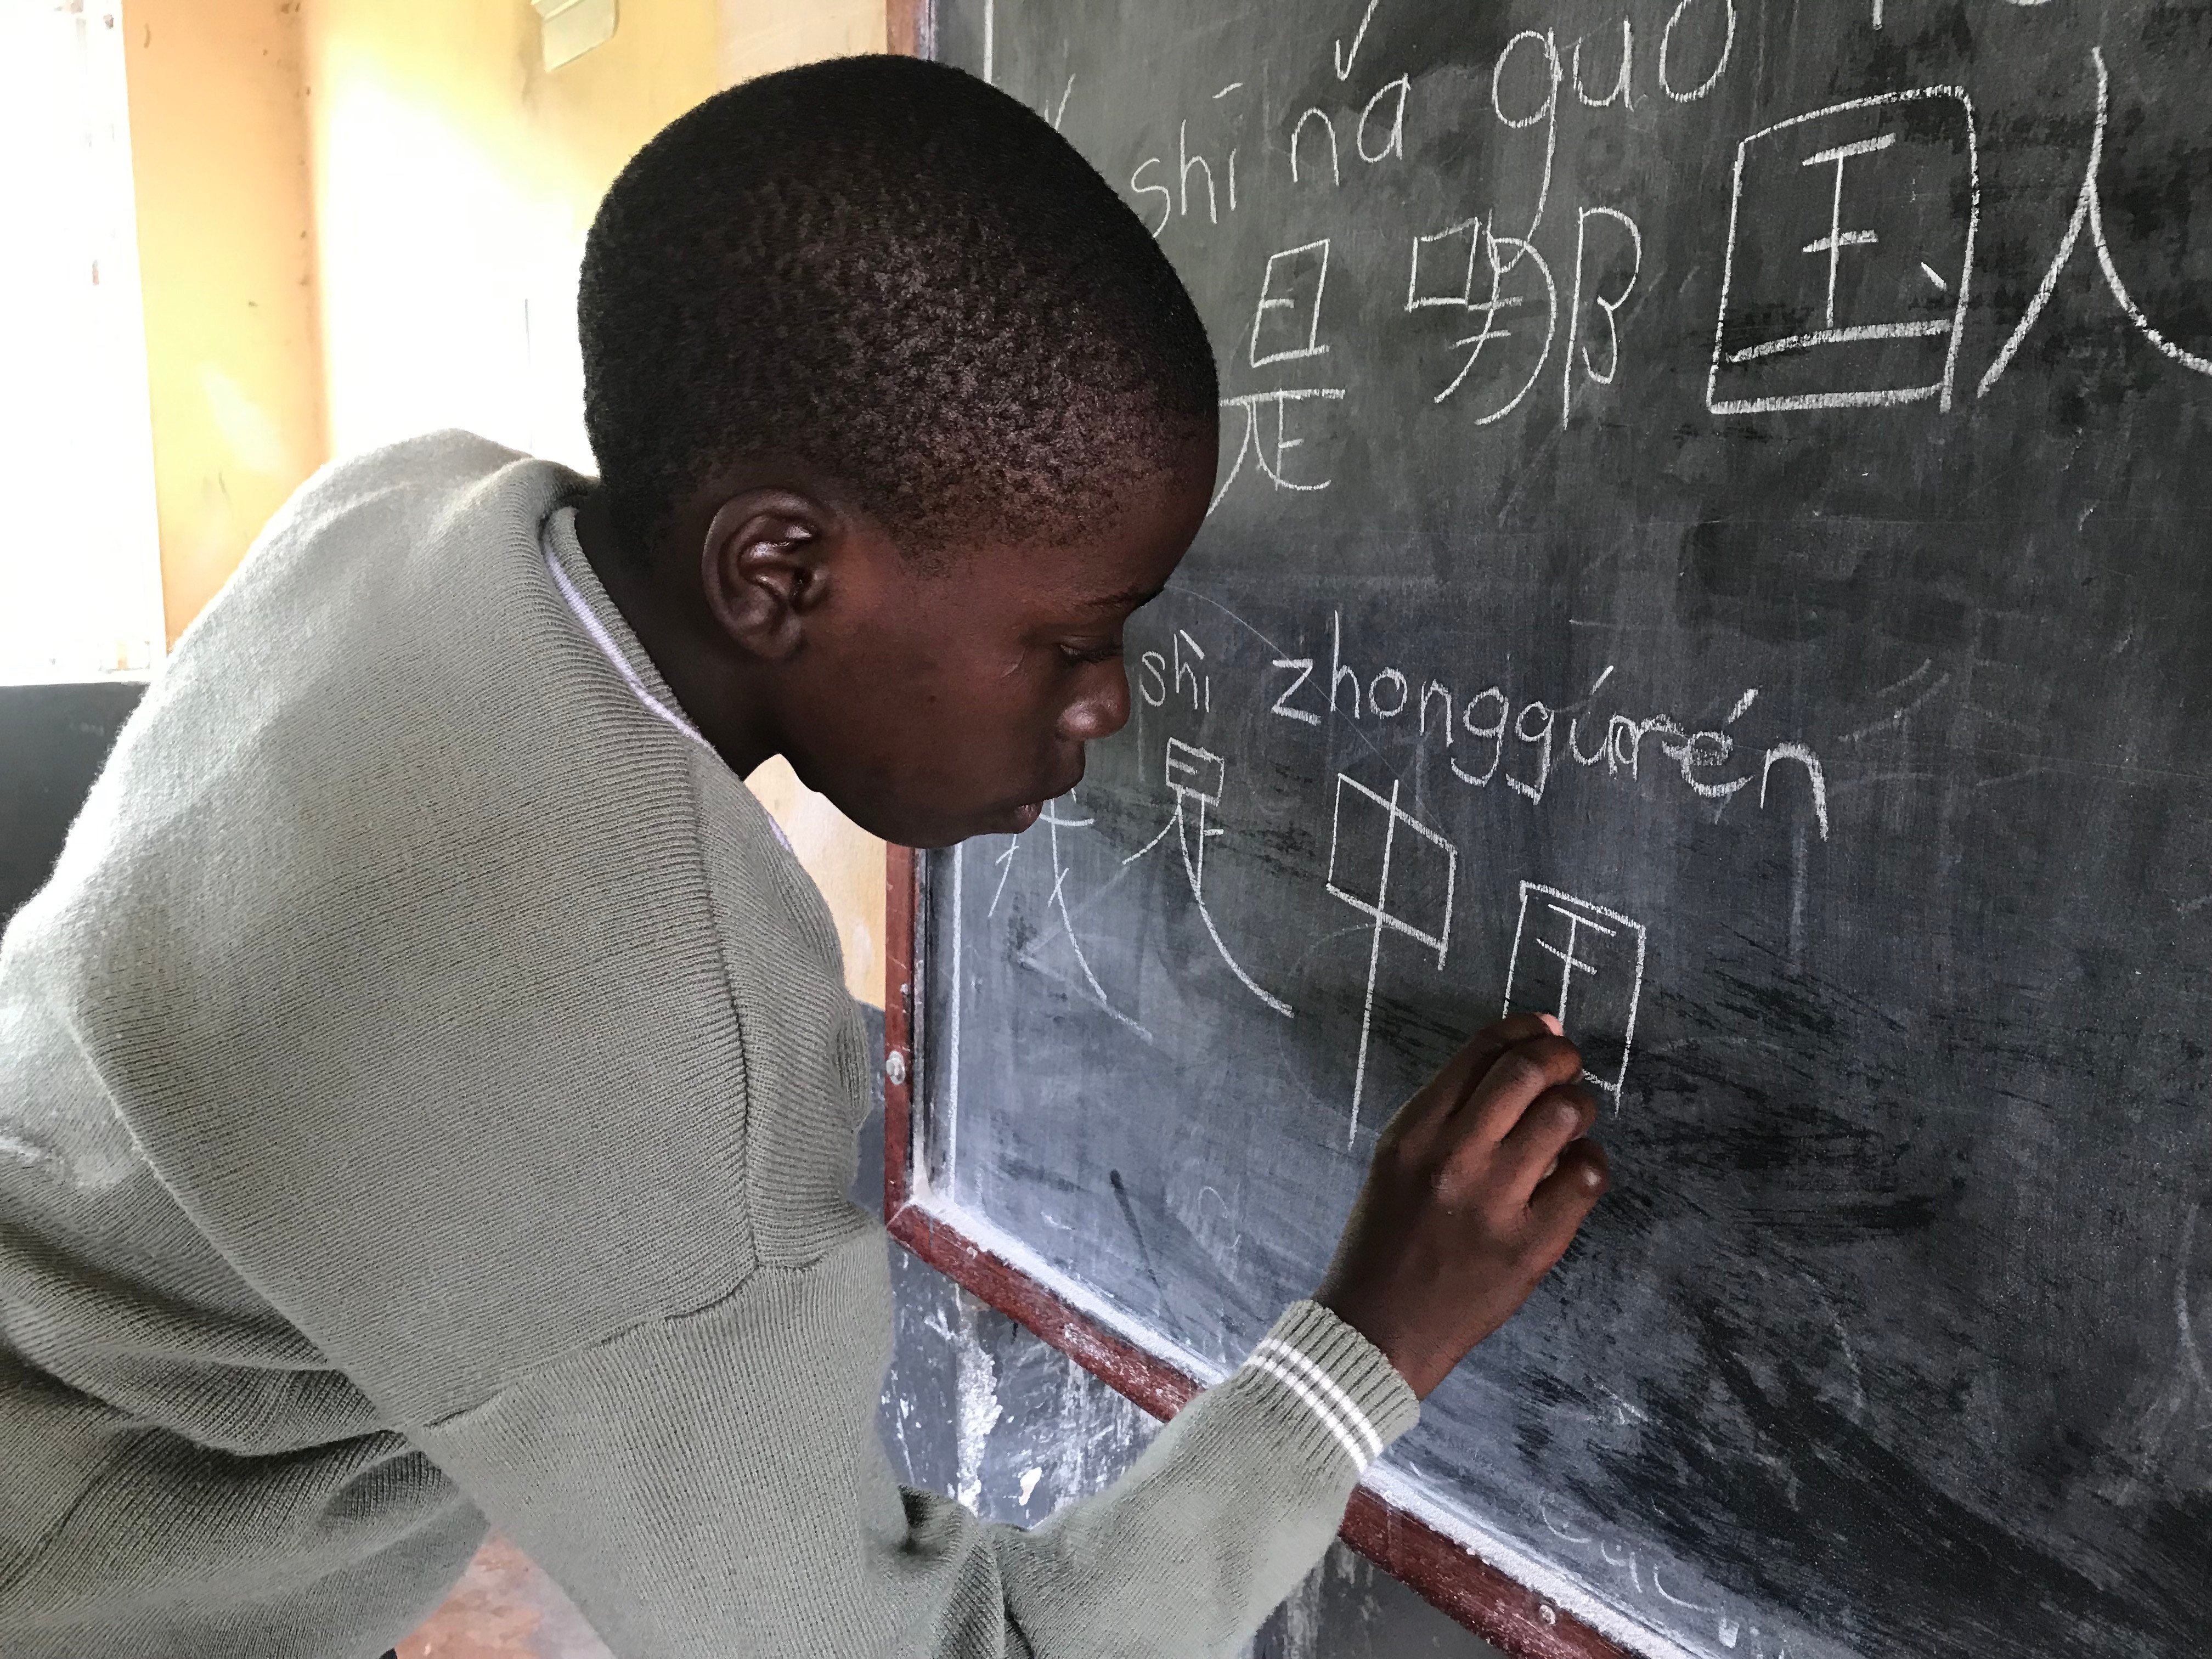 A high-schooler in Uganda learning Mandarin in school on September 29, 2019. Africa has yet to translate its huge and growing population into human capital. China is uniquely qualified to help. Photo: Shutterstock